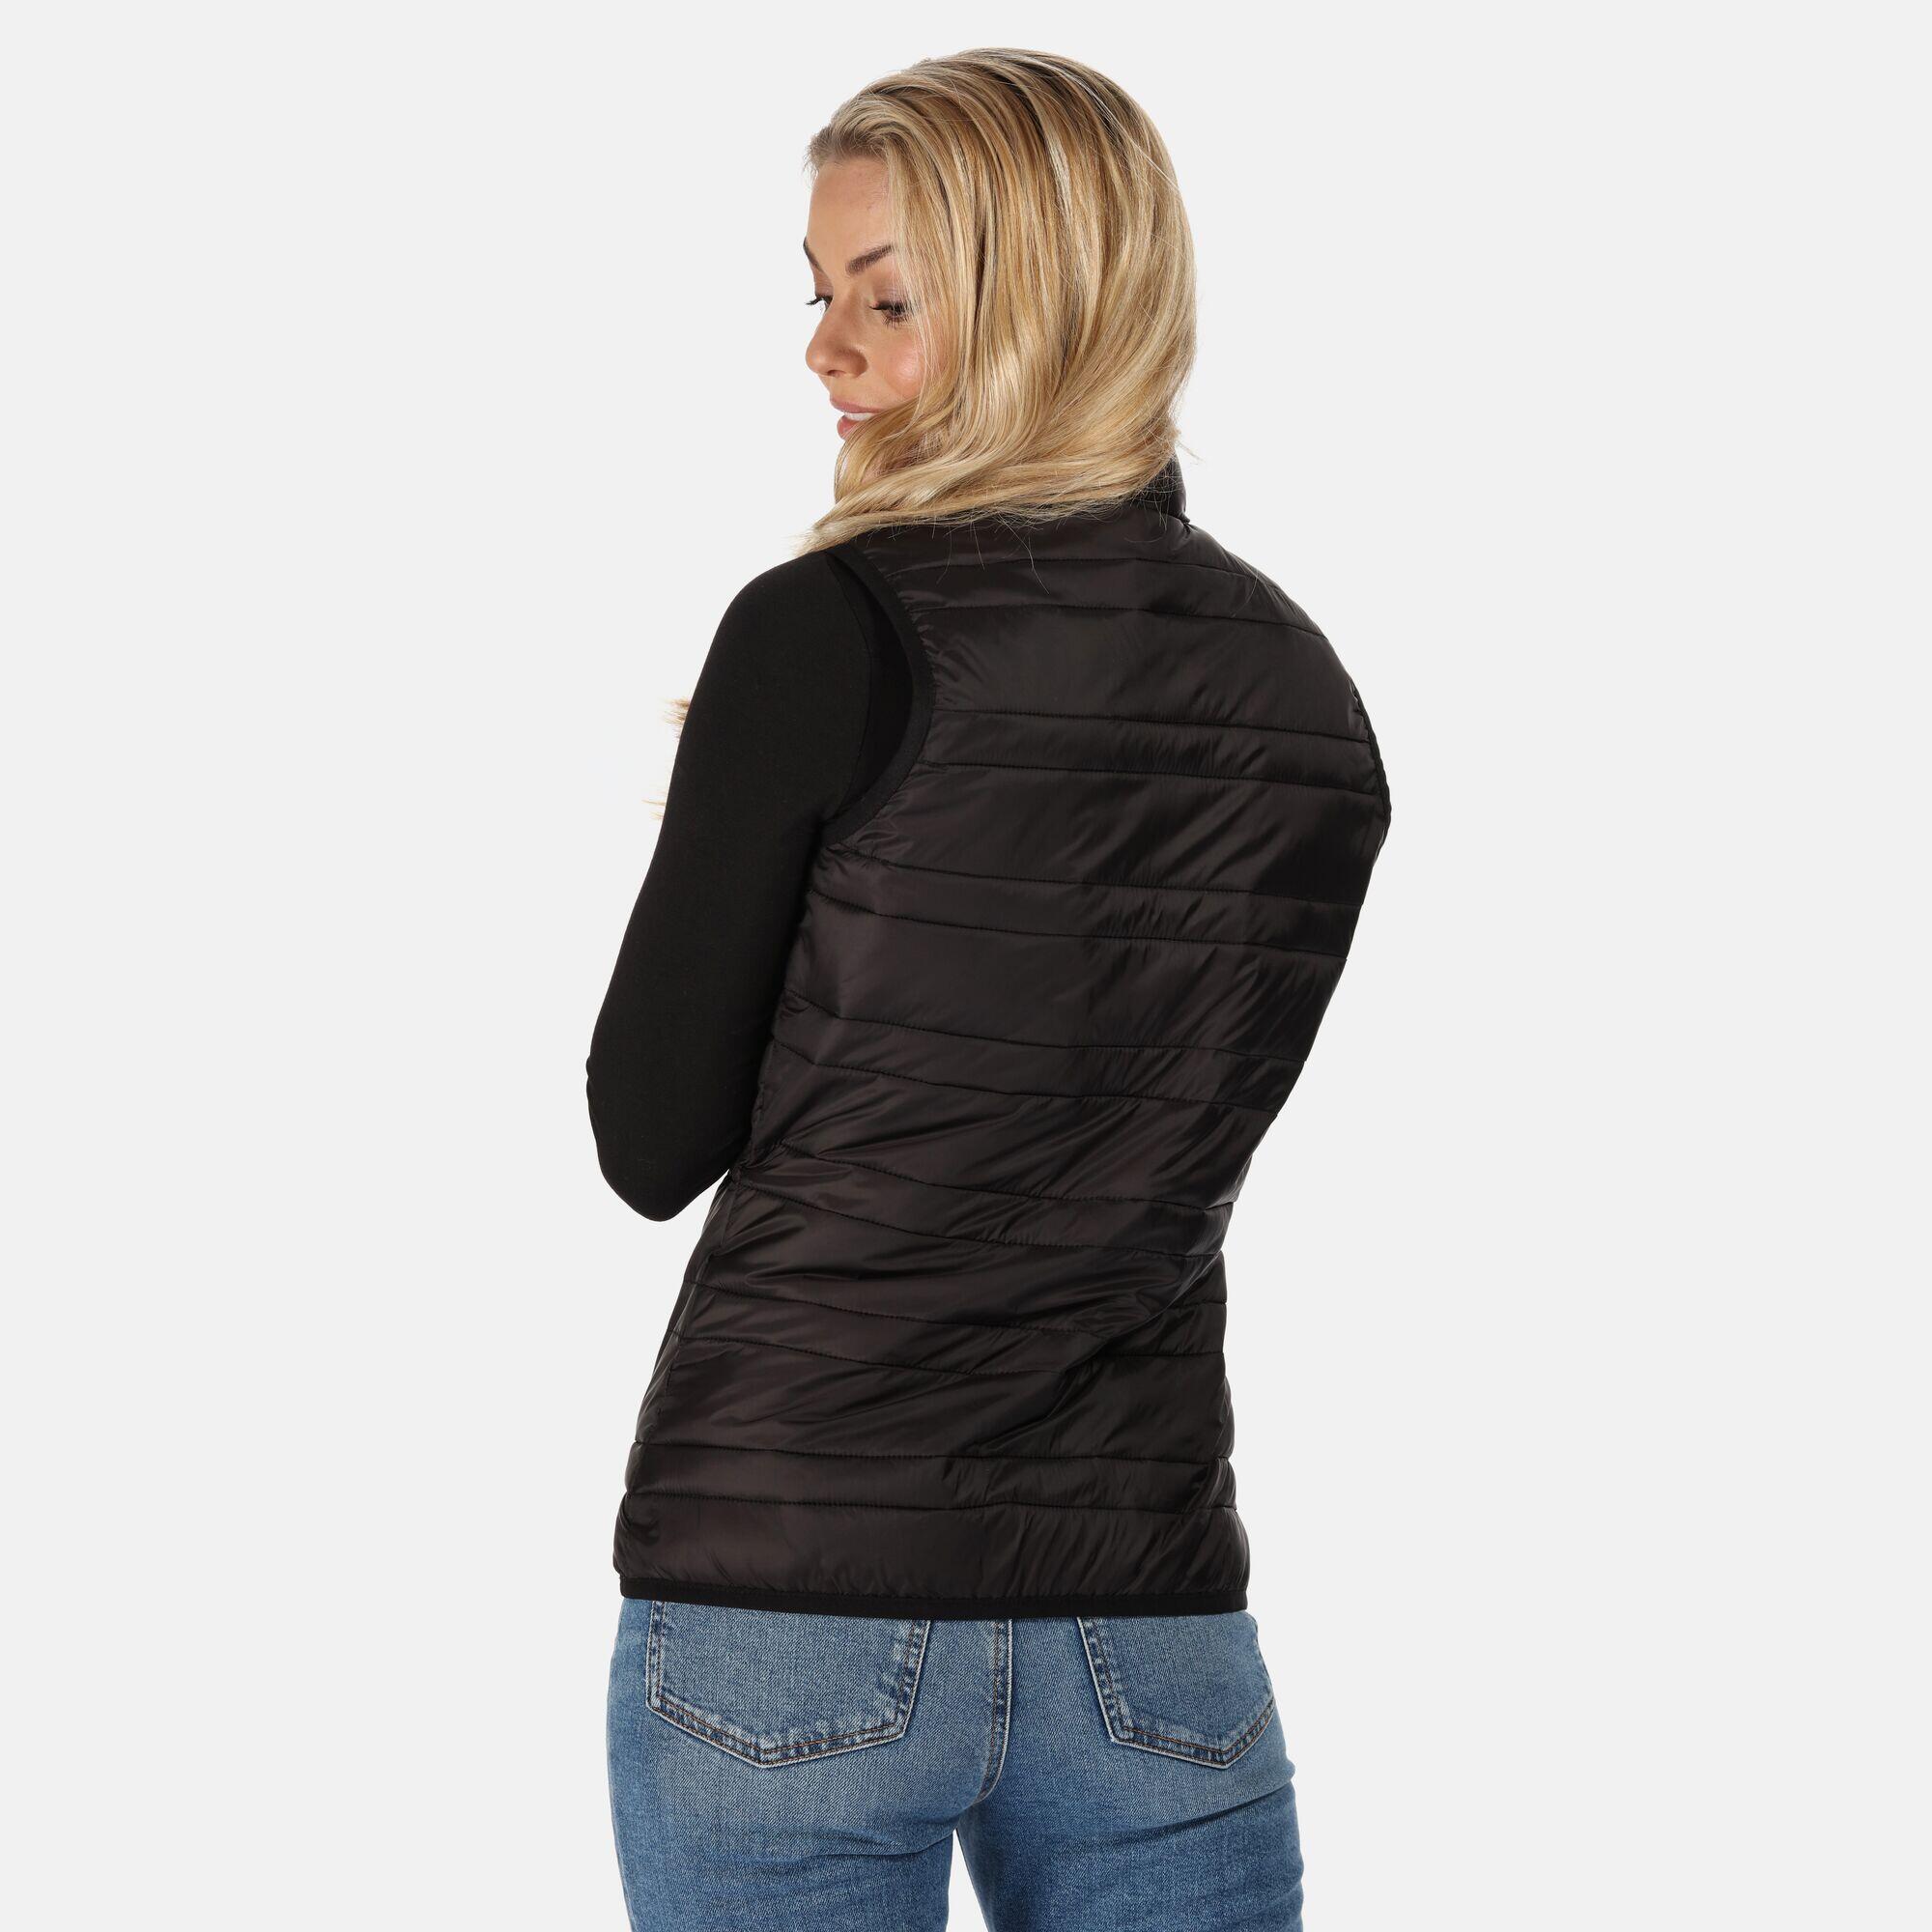 Womens/Ladies Firedown DownTouch Insulated Bodywarmer (Black) 2/4